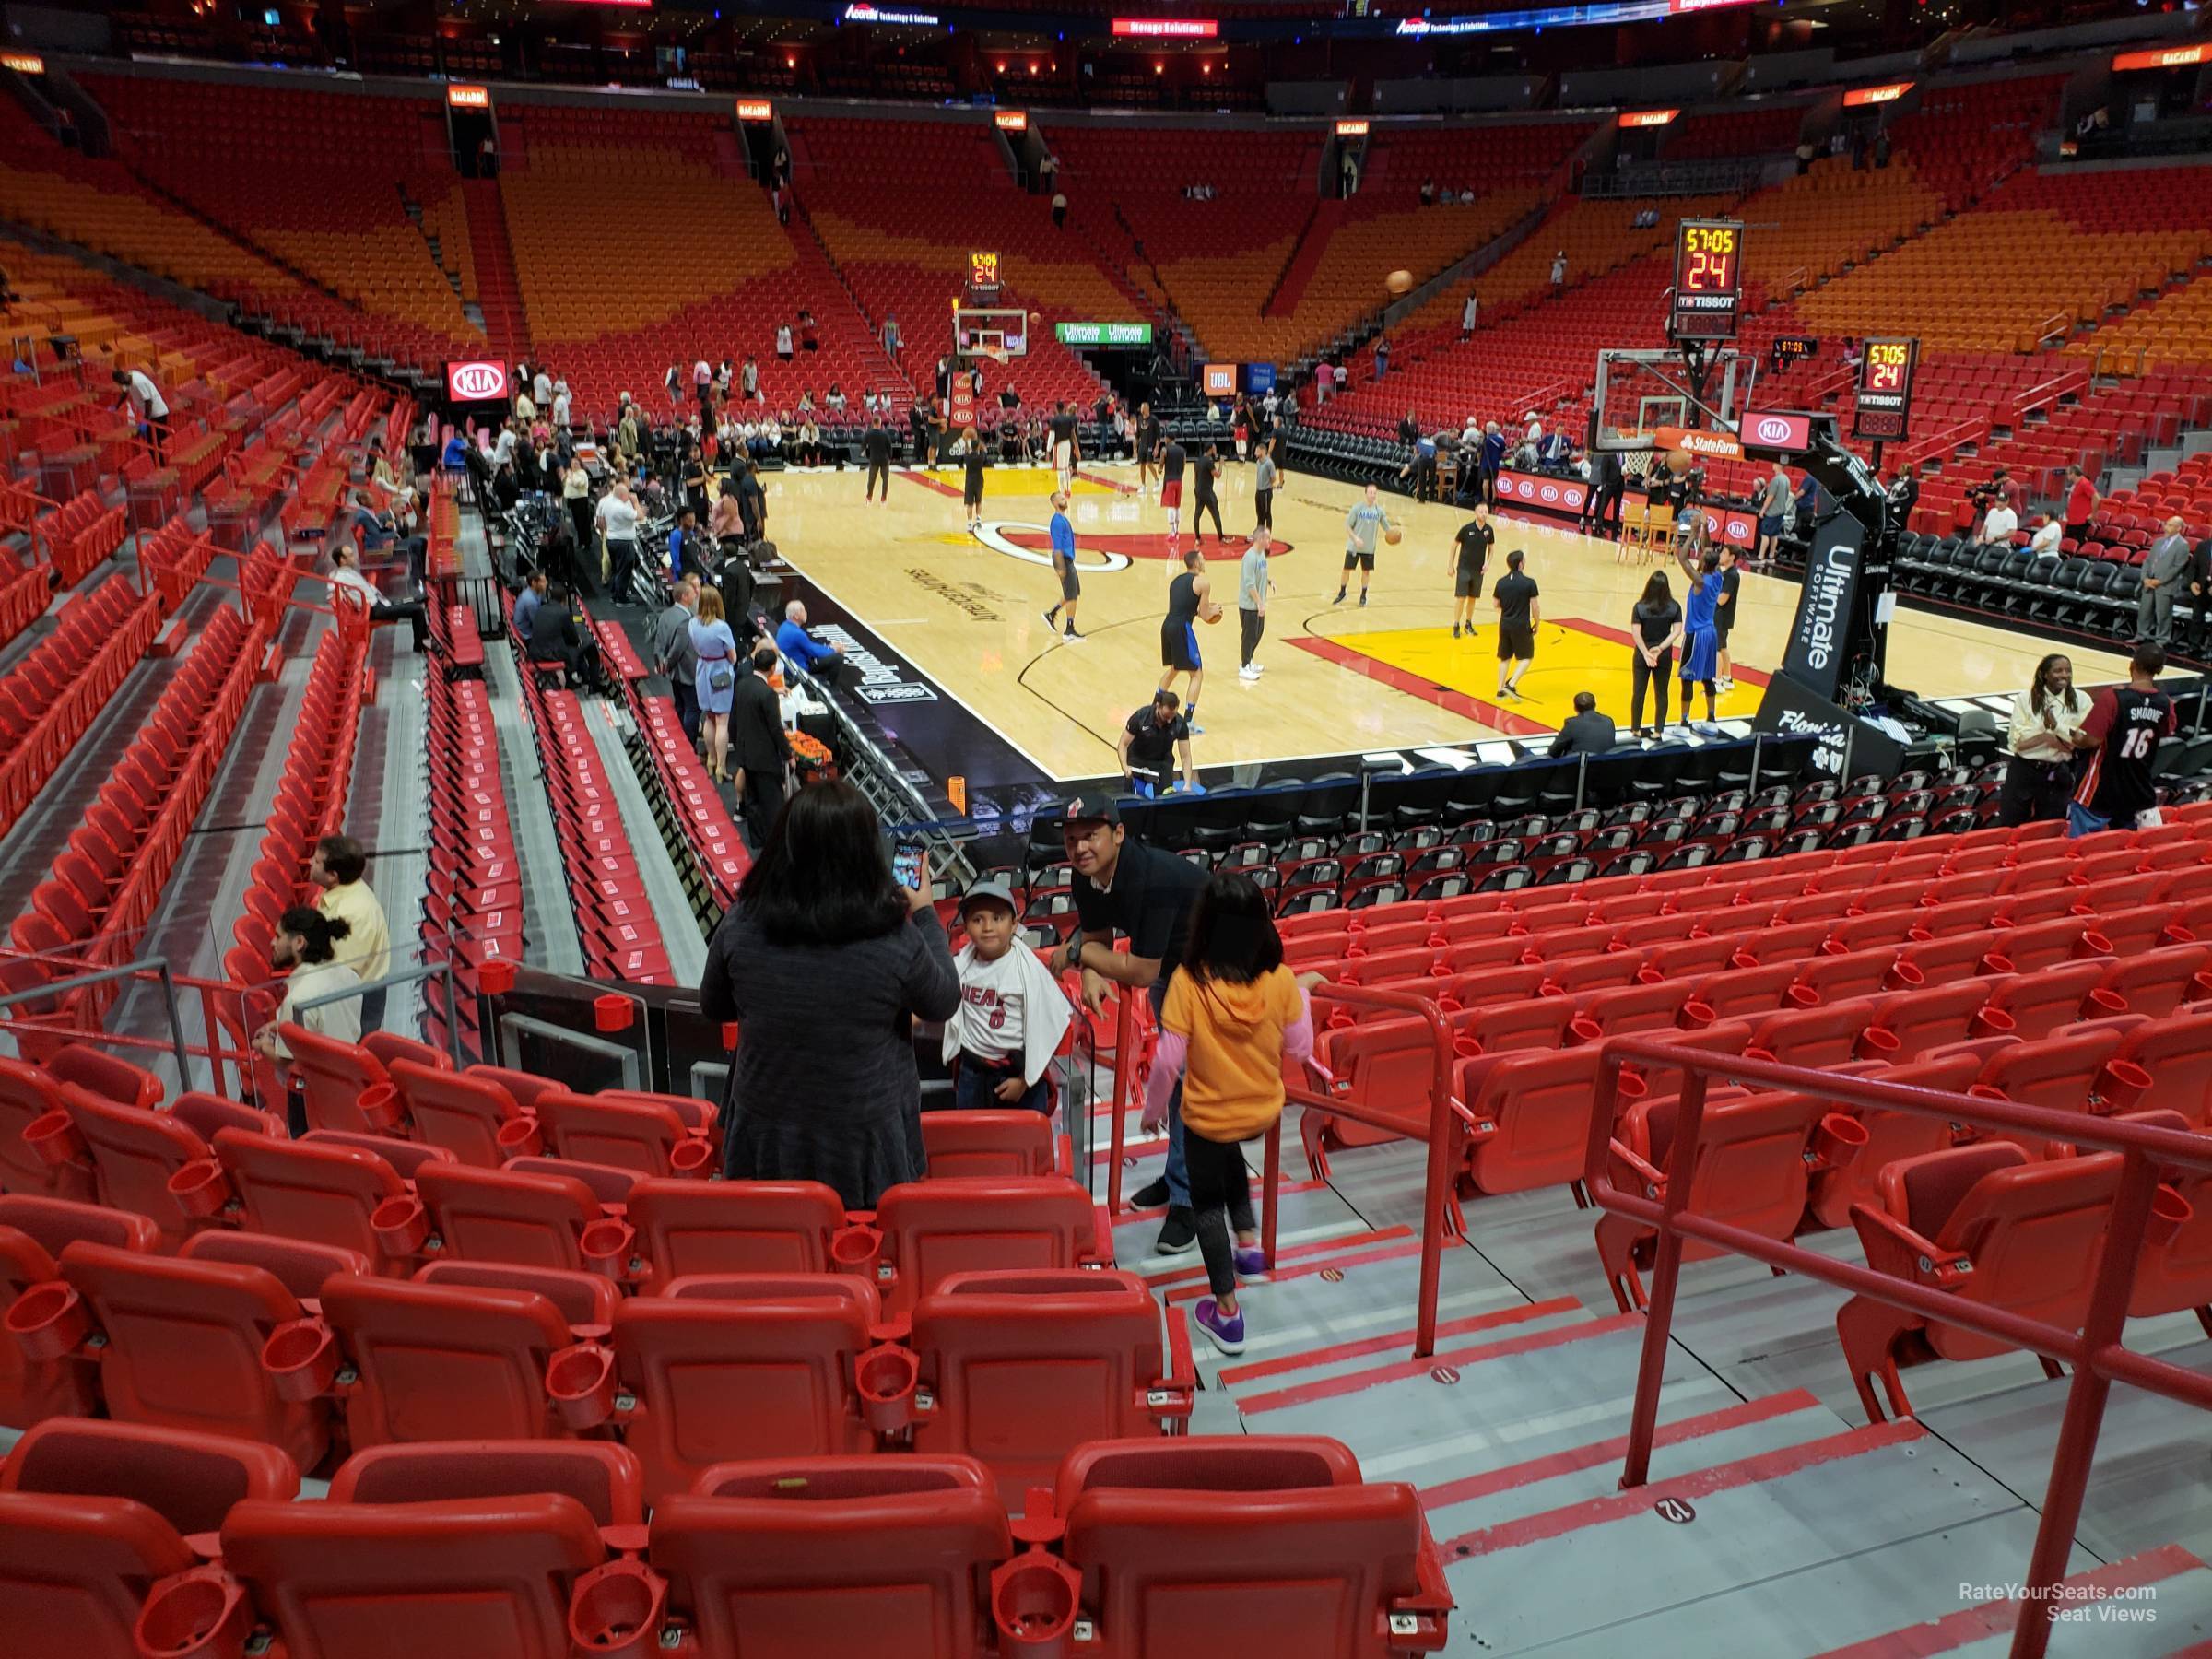 section 102, row 15 seat view  for basketball - miami-dade arena